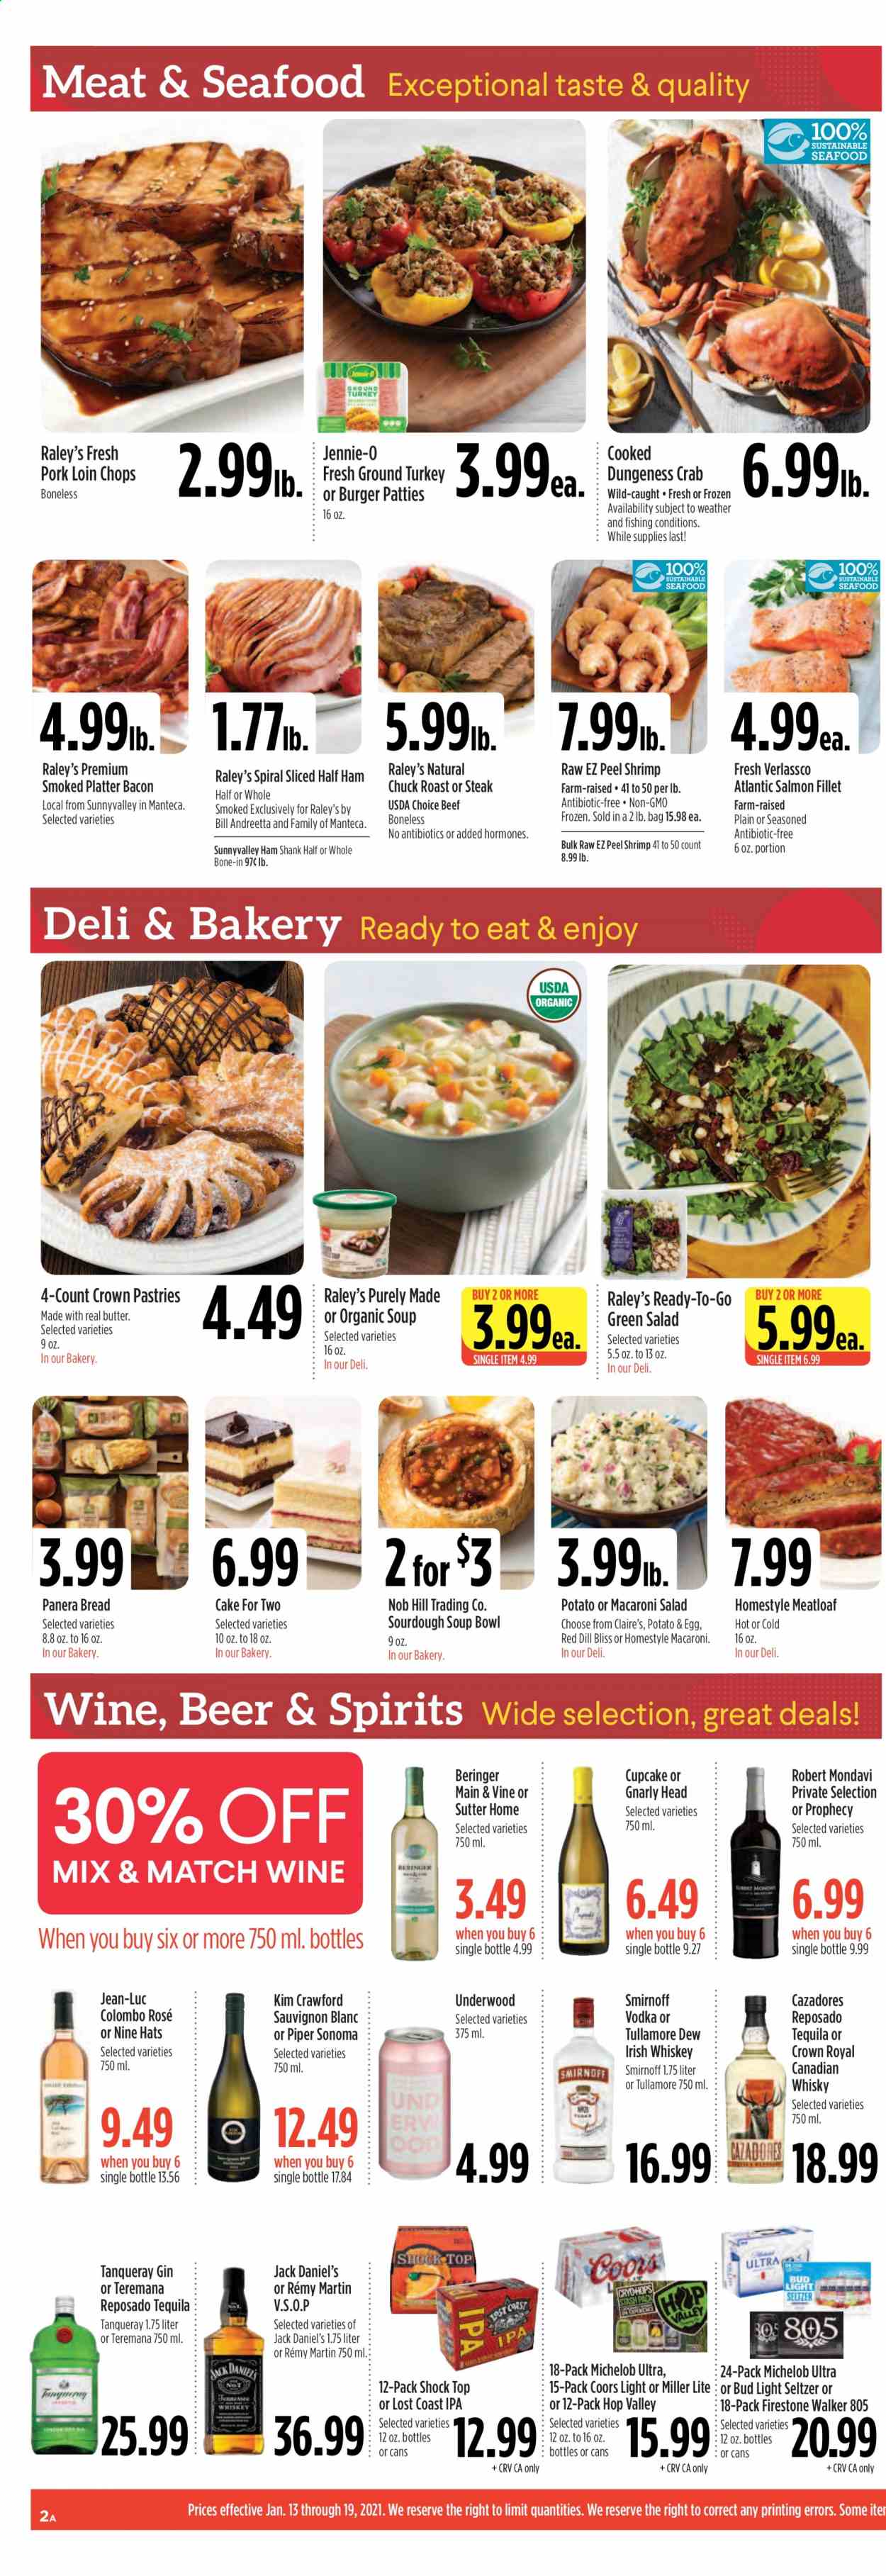 thumbnail - Raley's Flyer - 01/13/2021 - 01/19/2021 - Sales products - Miller Lite, Coors, Michelob, Dole, bread, tortillas, cupcake, pot pie, puffs, cheesecake, cake, pie, lobster, salmon, salmon fillet, seafood, crab, lobster tail, shrimps, Jack Daniel's, pizza, onion rings, soup, hamburger, meatloaf, Healthy Choice, Marie Callender's, Lunchables, Kraft®, Bertolli, Buitoni, bacon, ham, ham shank, Oscar Mayer, sausage, vienna sausage, macaroni salad, pasta salad, lunch meat, cottage cheese, ricotta, string cheese, pudding, Oreo, yoghurt, almond milk, milk, shake, muscle milk, ice cream, ice cream bars, Hershey's, Enlightened lce Cream, beans, strips, chicken strips, cookies, graham crackers, Nestlé, Nutella, chocolate, Bounty, crackers, Kellogg's, biscuit, Keebler, croutons, popcorn, Frito-Lay, Skinny Pop, topping, Heinz, olives, cereals, protein bar, granola bar, belVita, Honey Maid, Nature Valley, Fiber One, Nutri-Grain, dill, salad dressing, ketchup, pasta sauce, dressing, peanut butter, hazelnut spread, Blue Diamond, Coca-Cola, Mountain Dew, Pepsi, energy drink, Dr. Pepper, Diet Pepsi, coconut water, 7UP, A&W, Gold Peak Tea, Bai, seltzer water, spring water, hot cocoa, tea, coffee, Starbucks, Folgers, ground coffee, coffee capsules, K-Cups, Lavazza, Sauvignon Blanc, canadian whisky, gin, Smirnoff, tequila, vodka, whiskey, irish whiskey, Rémy Martin, whisky, beer, Bud Light, IPA, Firestone Walker, ground turkey, beef meat, beef sirloin, steak, sirloin steak, chuck roast, burger patties, pork loin, pork meat, tissues, kitchen towels, paper towels, detergent, Tide, laundry detergent, rose, Go!, avocado. Page 2.